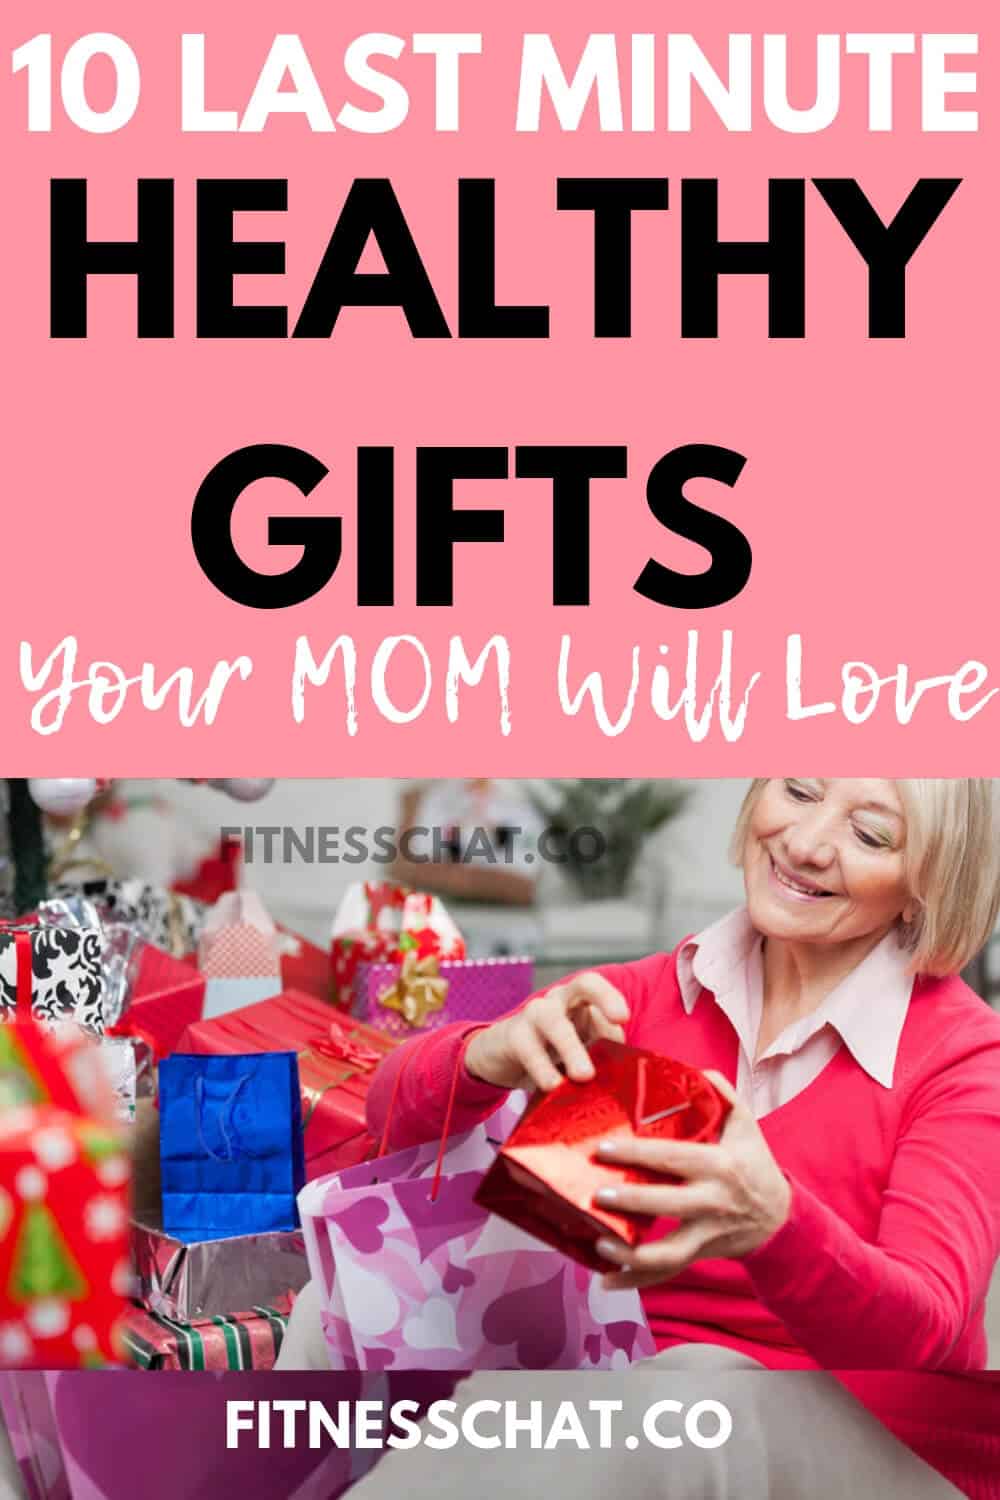 mother's day gifts ideas. birthday gifts for mom. mom birthday gift from daughter.